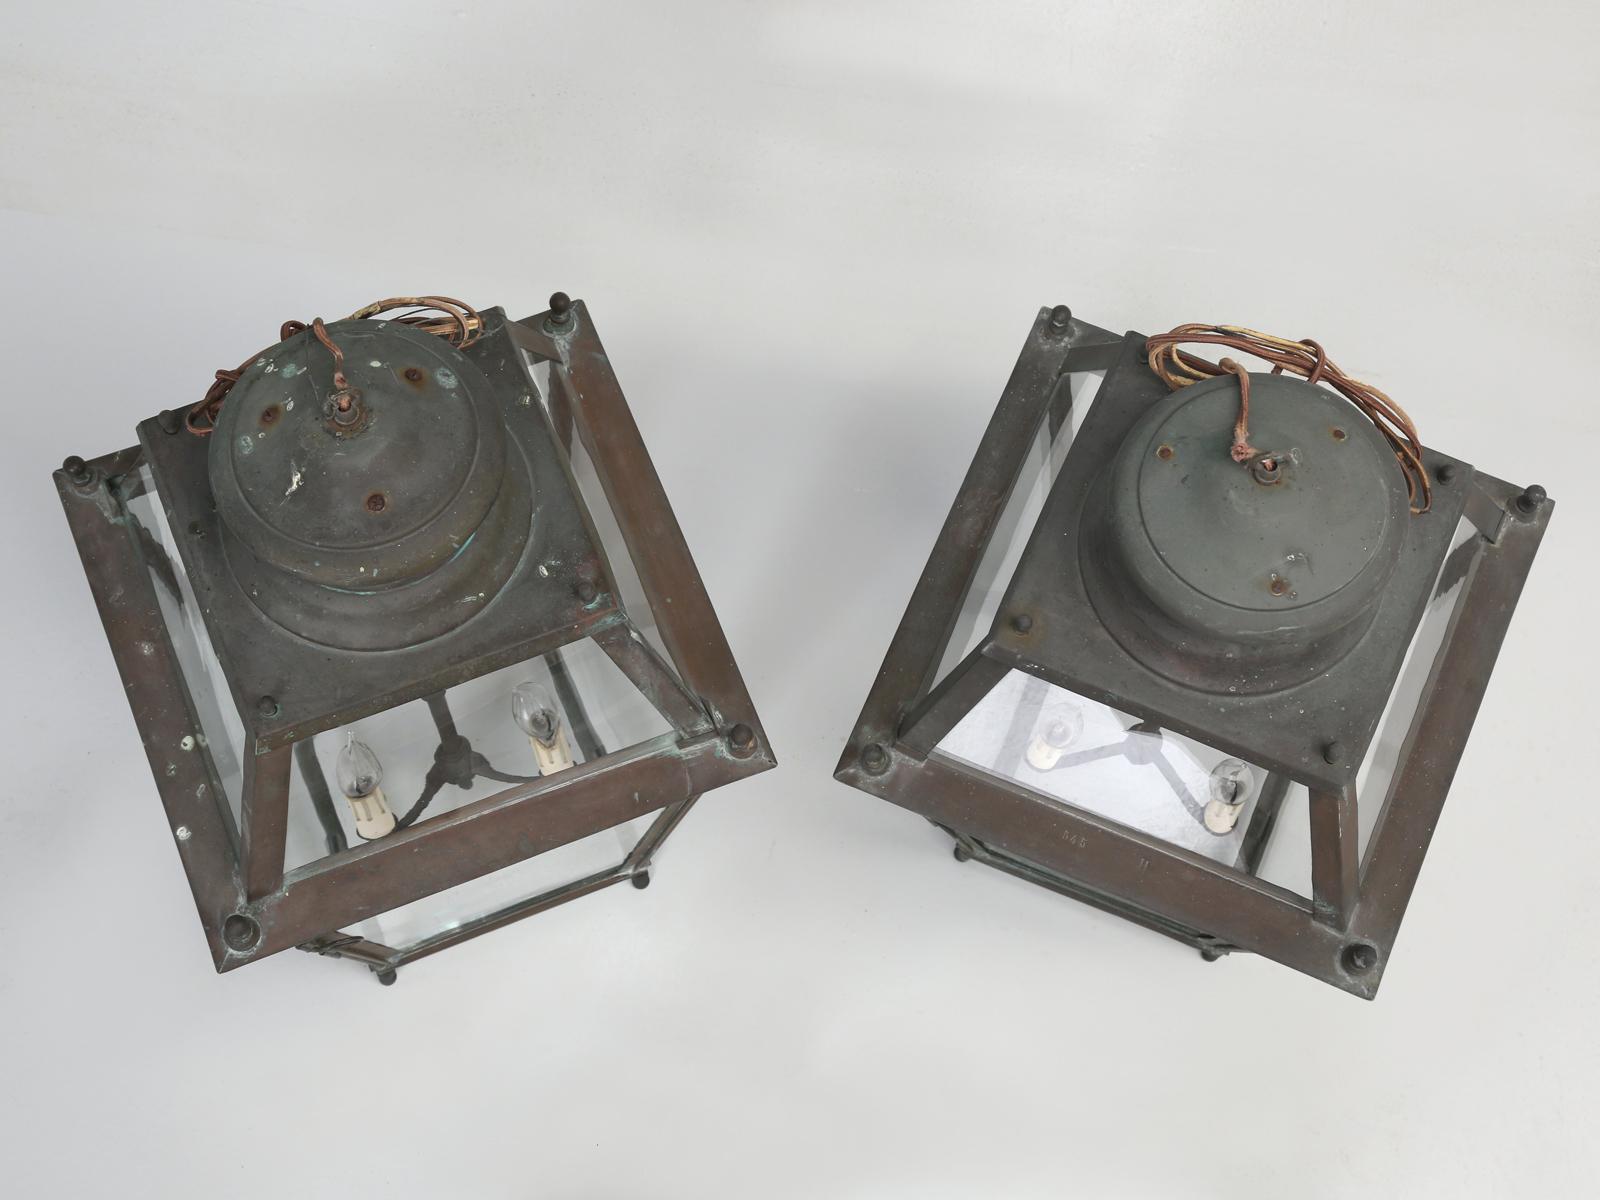 Pair of old French copper lanterns, that have been converted to USA standard candelabra bulbs and all new wiring has been installed in the antique French copper lanterns. The glass panes in the French lanterns are all original French wavy glass and